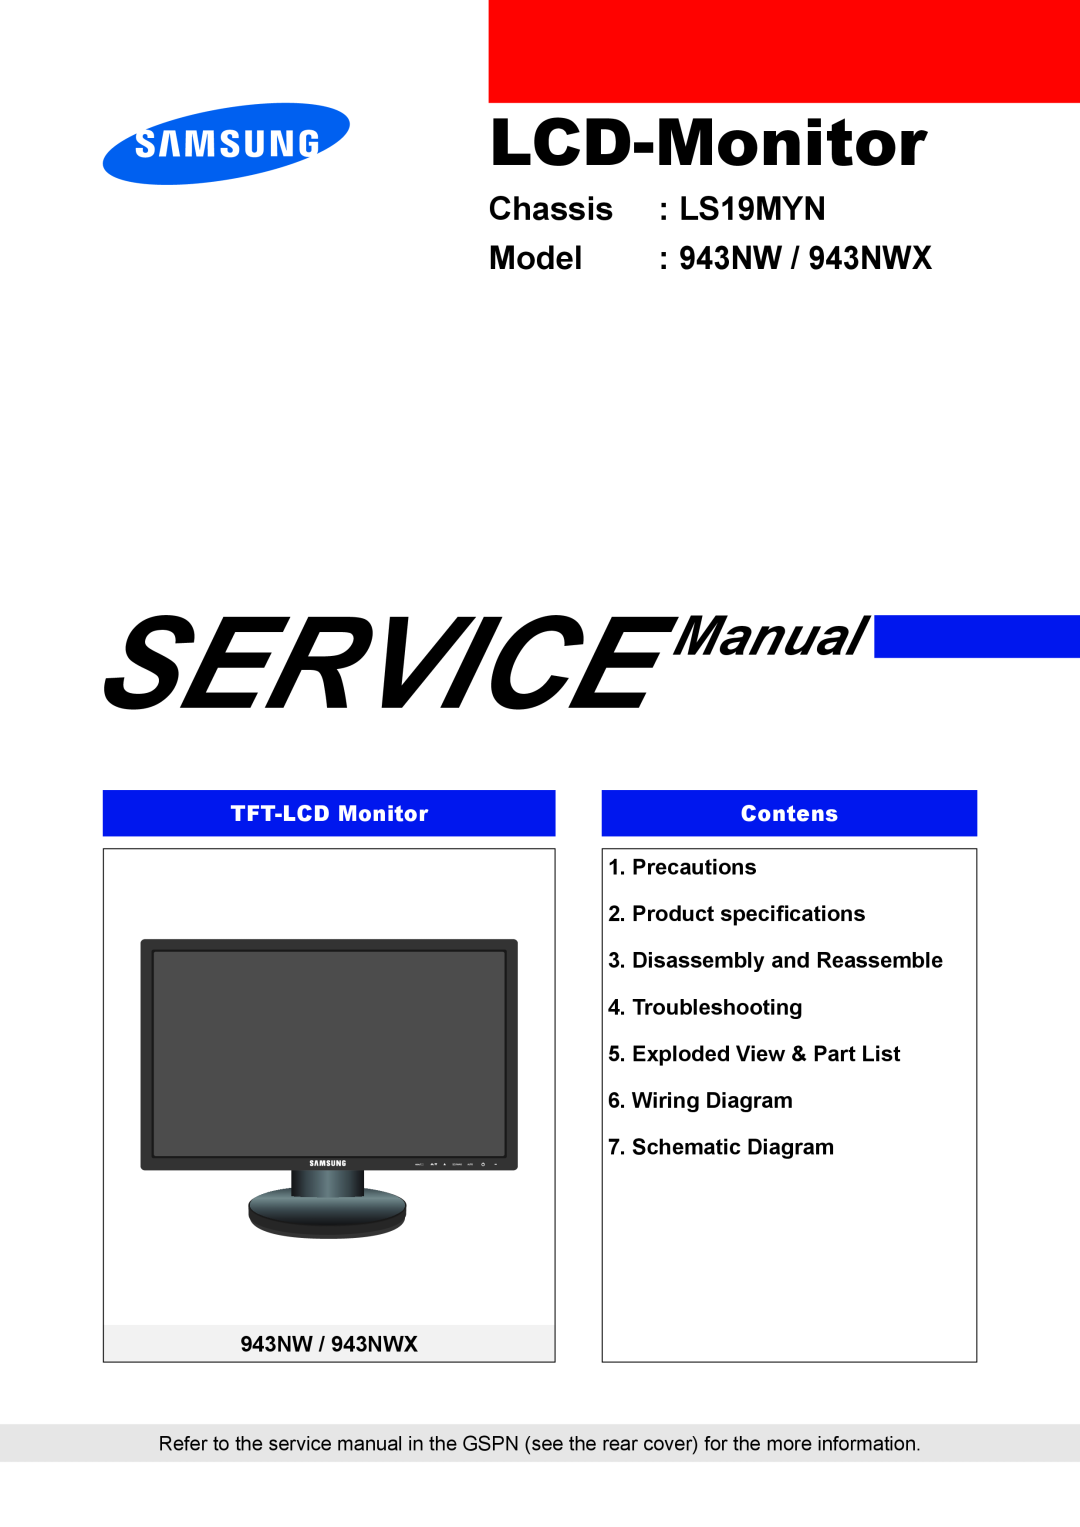 Samsung service manual SERVICE Manual, LCD-Monitor, Chassis, LS19MYN, Model, 943NW / 943NWX, TFT-LCD Monitor, Contens 